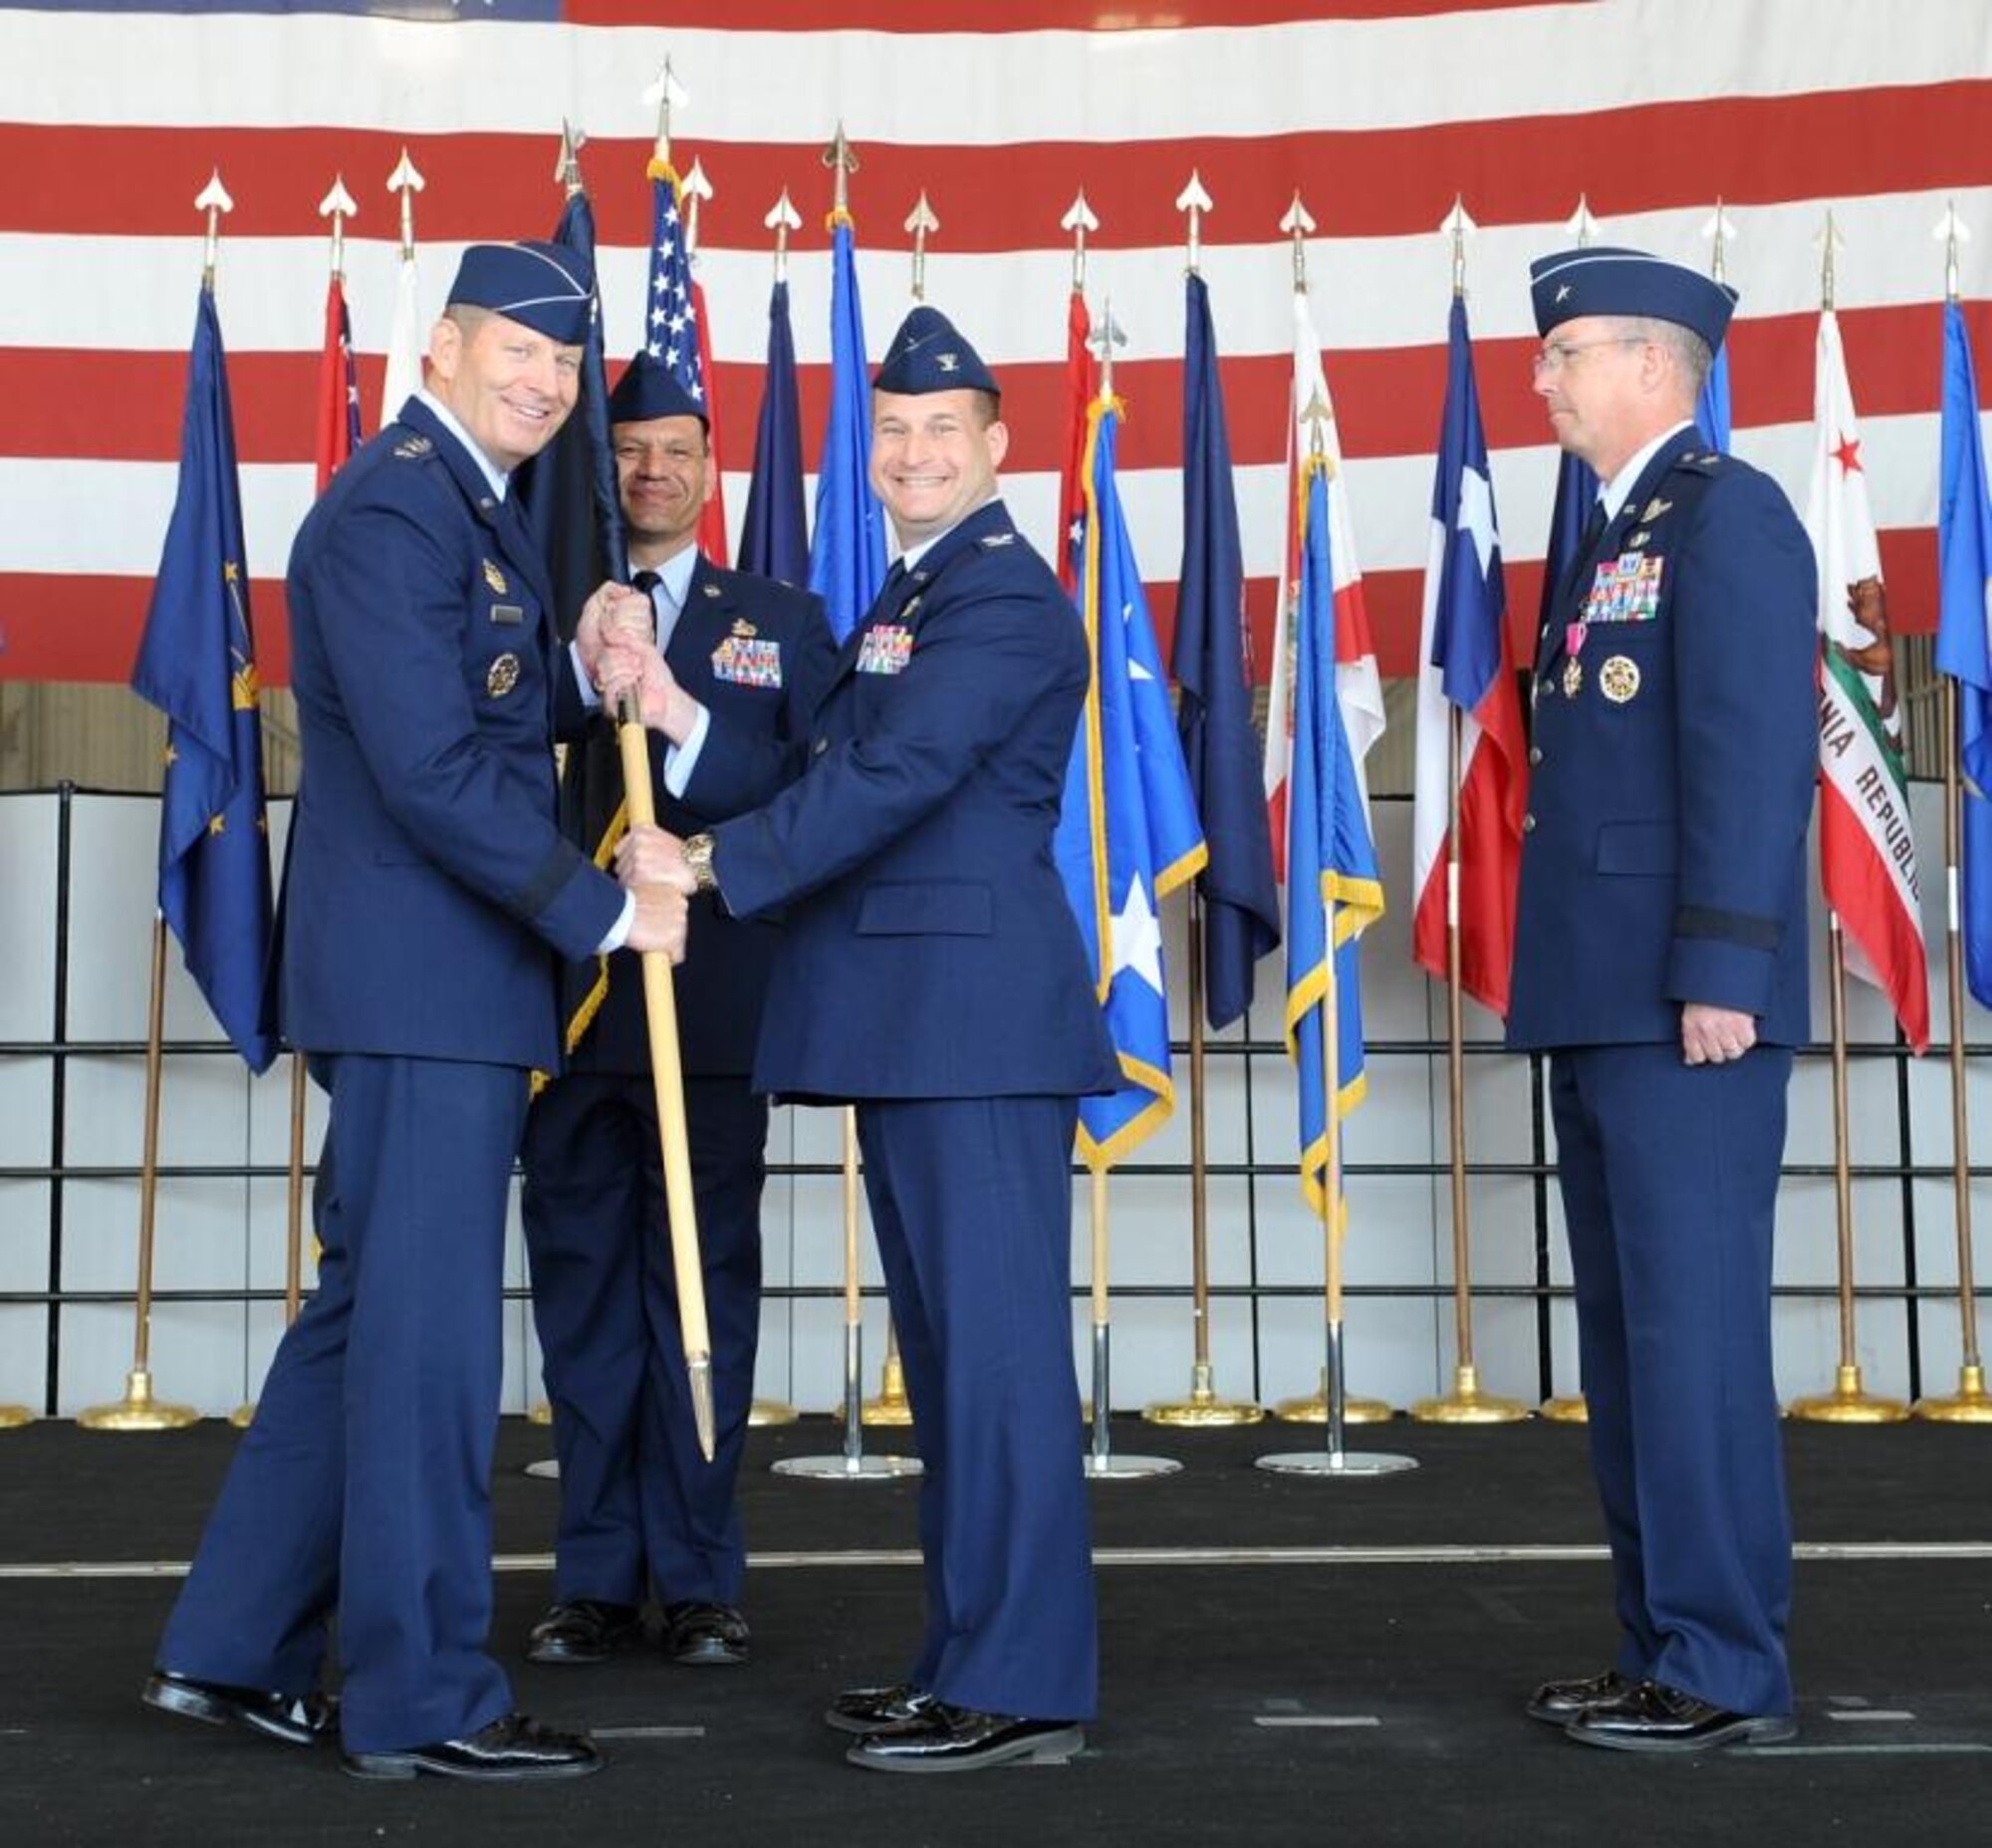 Lt. Gen. Robin Rand, 12th Air Force commander, presents the newest 9th Reconnaissance Wing commander Col. Phil Stewart with the wing’s guidon during a change of command ceremony at Beale Air Force Base Calif., May 10, 2012. Stewart severed as the wing’s vice commander prior to taking command from Brig. Gen. Paul McGillicuddy (right). (U.S. Air Force photo by John Schwab/Released)